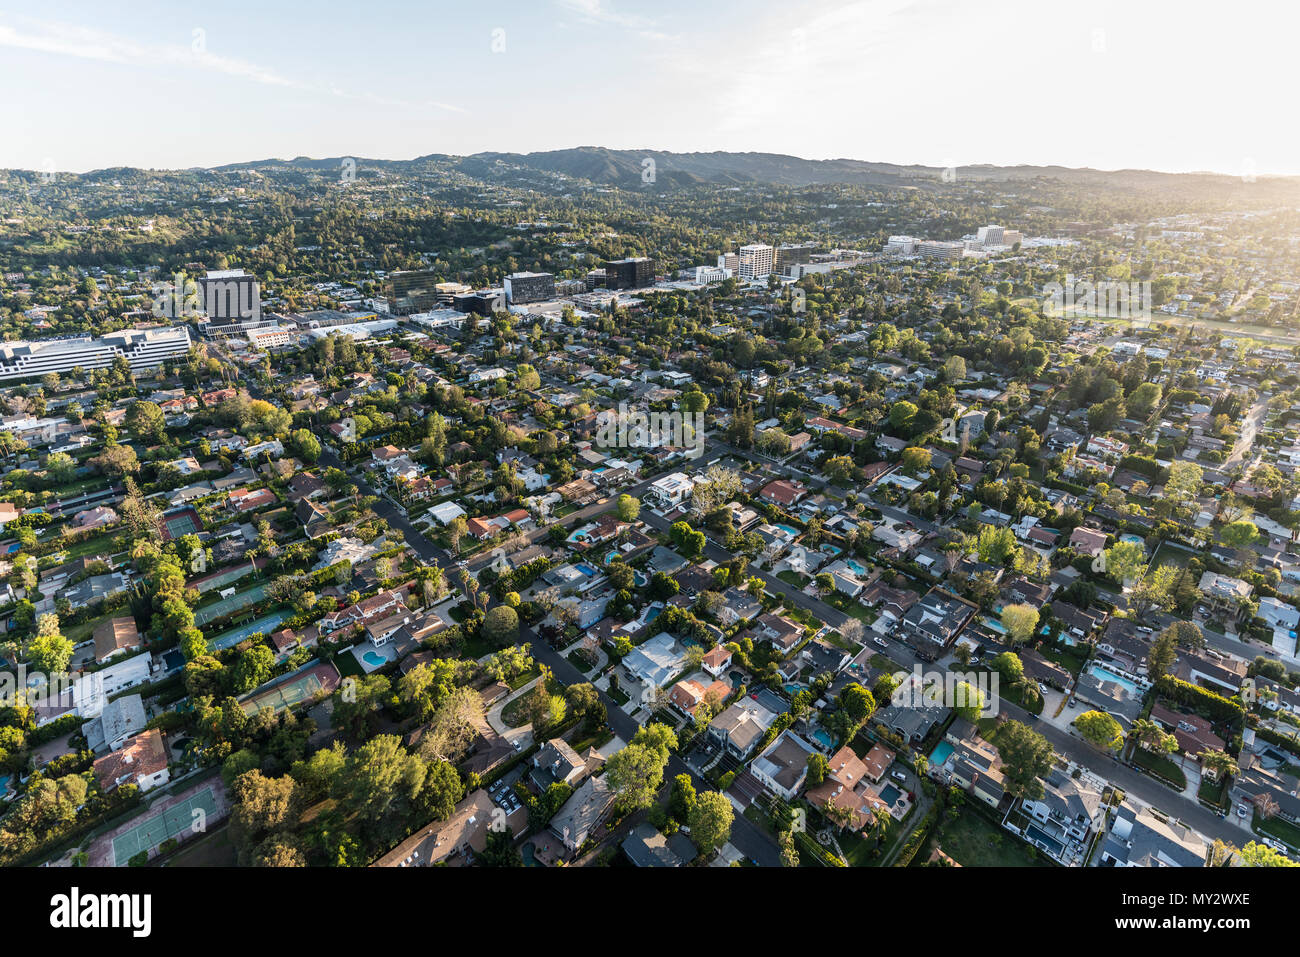 Late afternoon aerial view of Sherman Oaks and Encino in the San Fernando Valley area of Los Angeles, California. Stock Photo